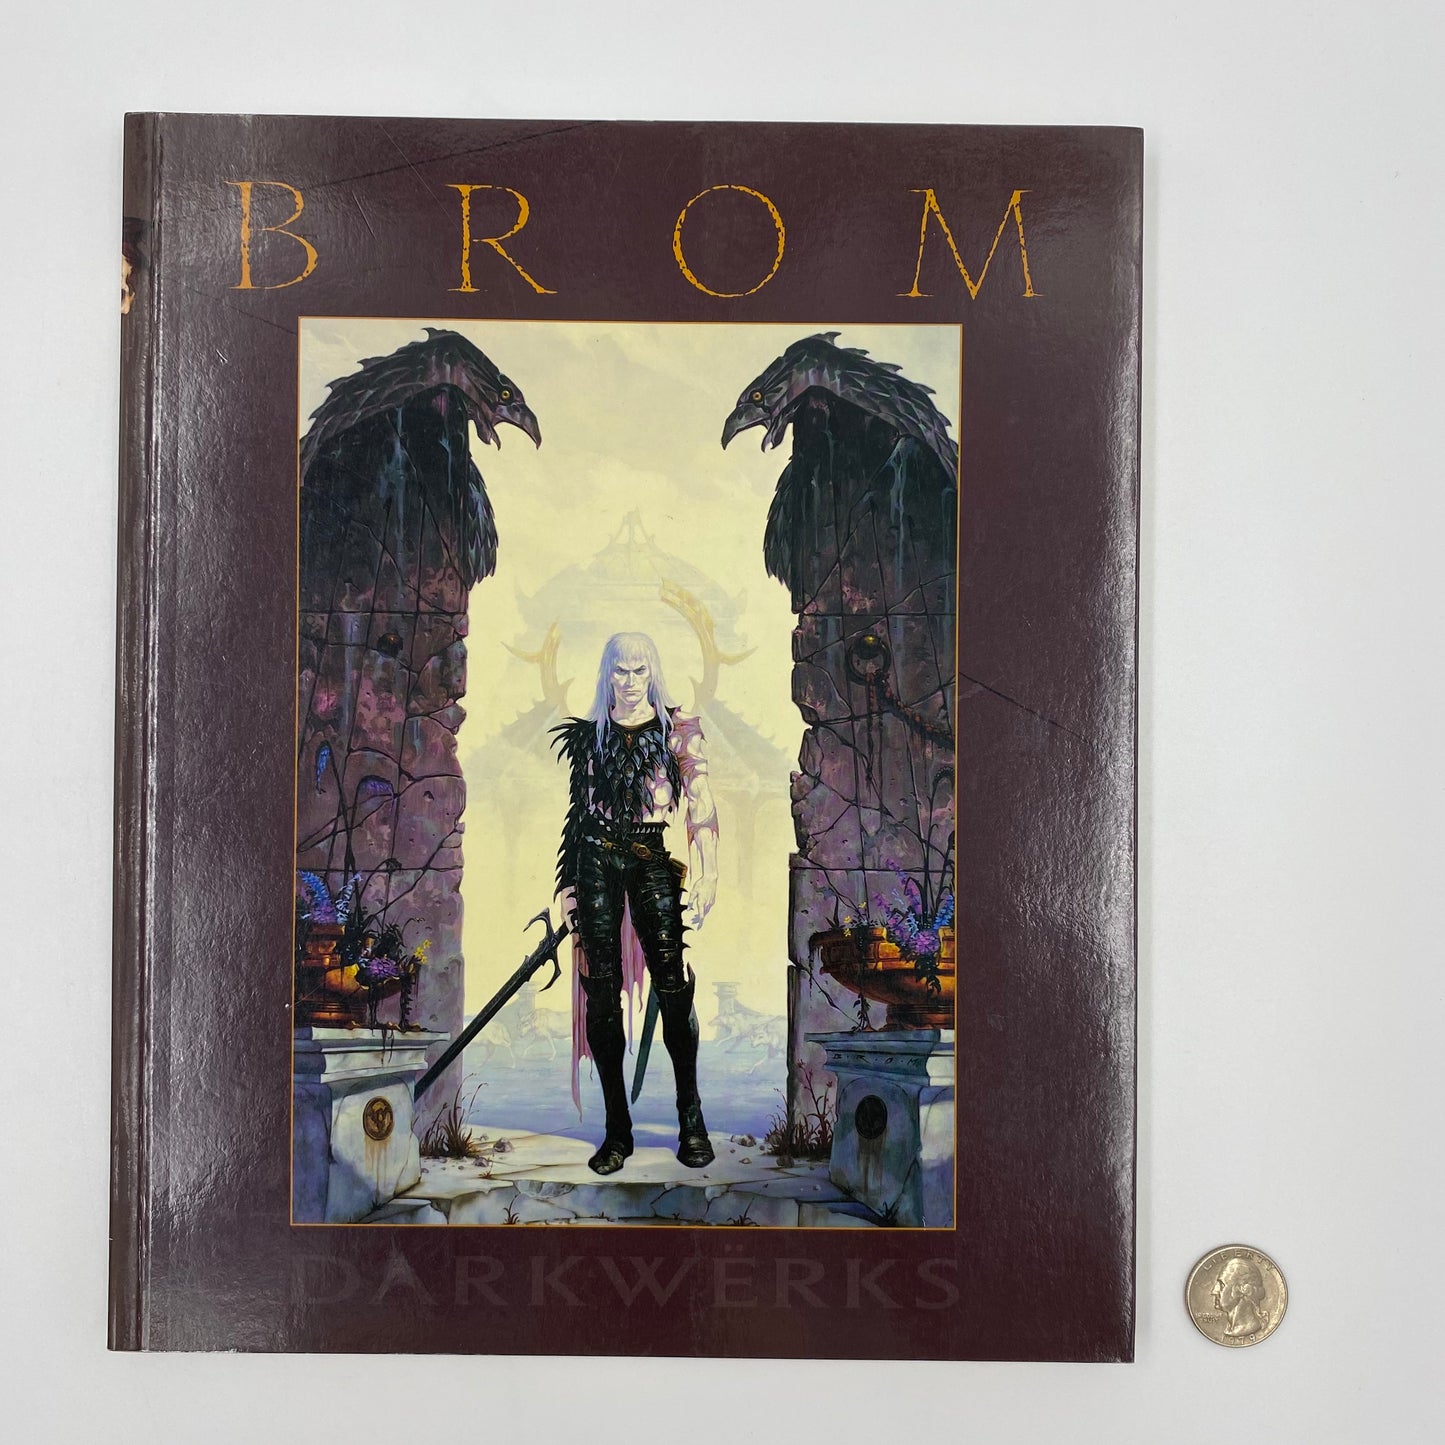 Brom: Darkwerks first edition softcover (1997) FPG